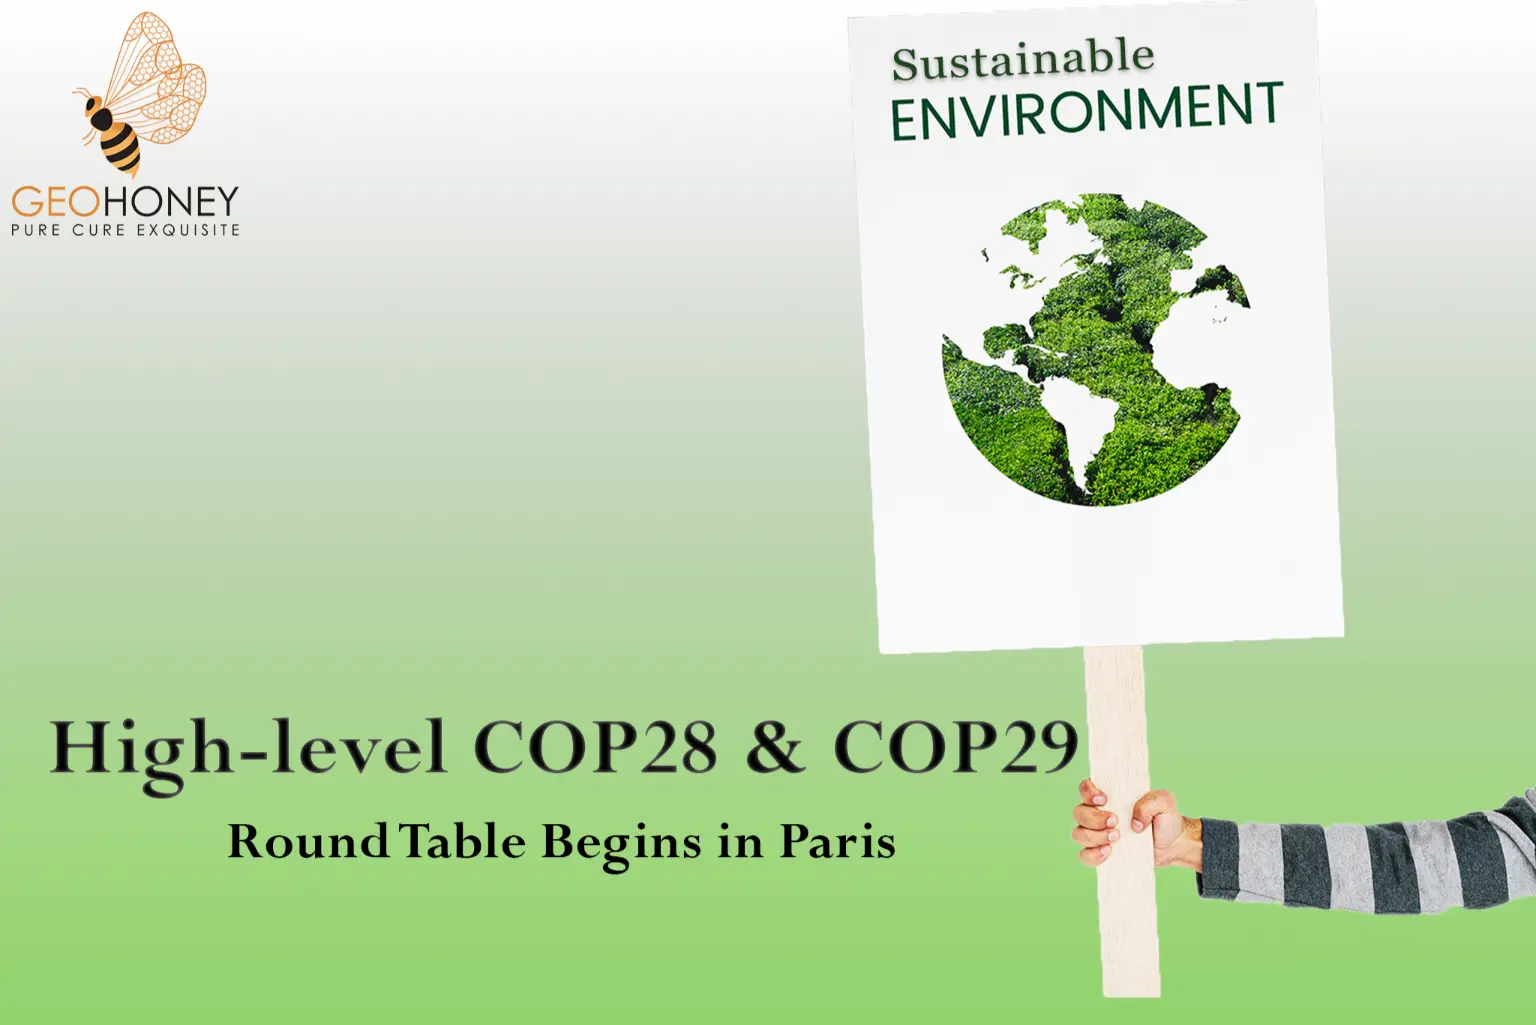 High-level COP28 and COP29 Round Table Begins in Paris